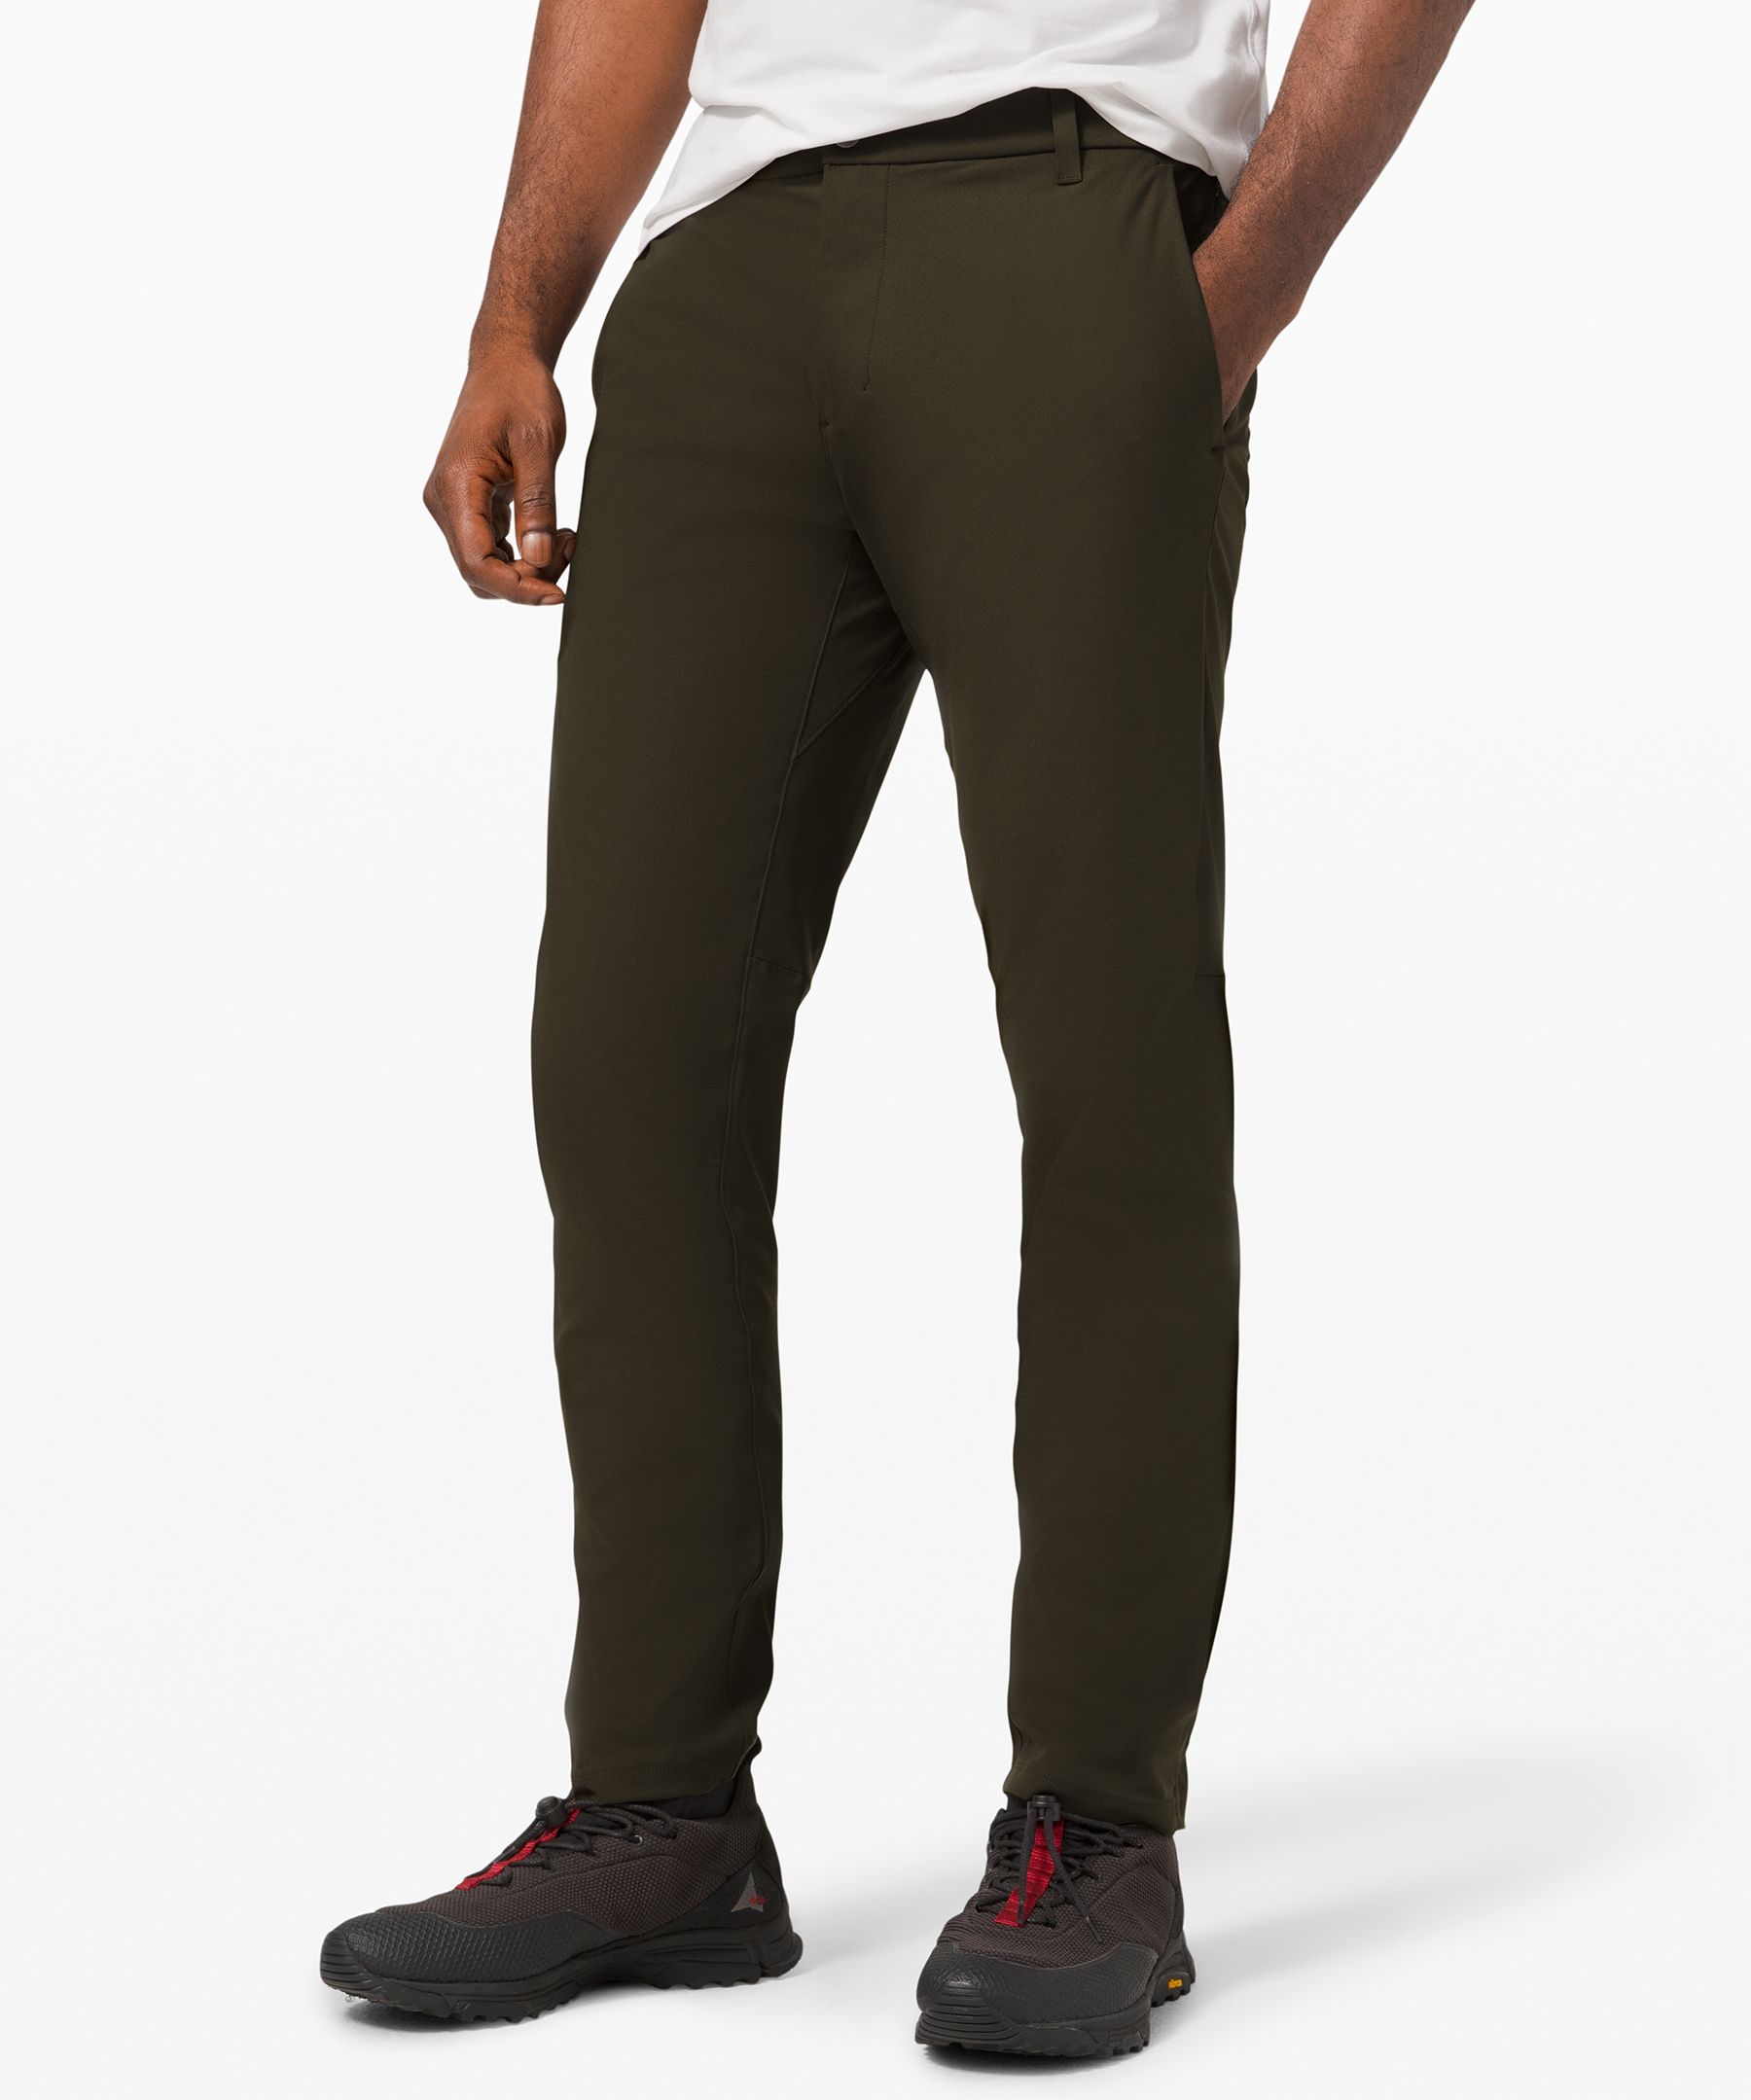 Lululemon Cargo Pants Blue And Red  International Society of Precision  Agriculture